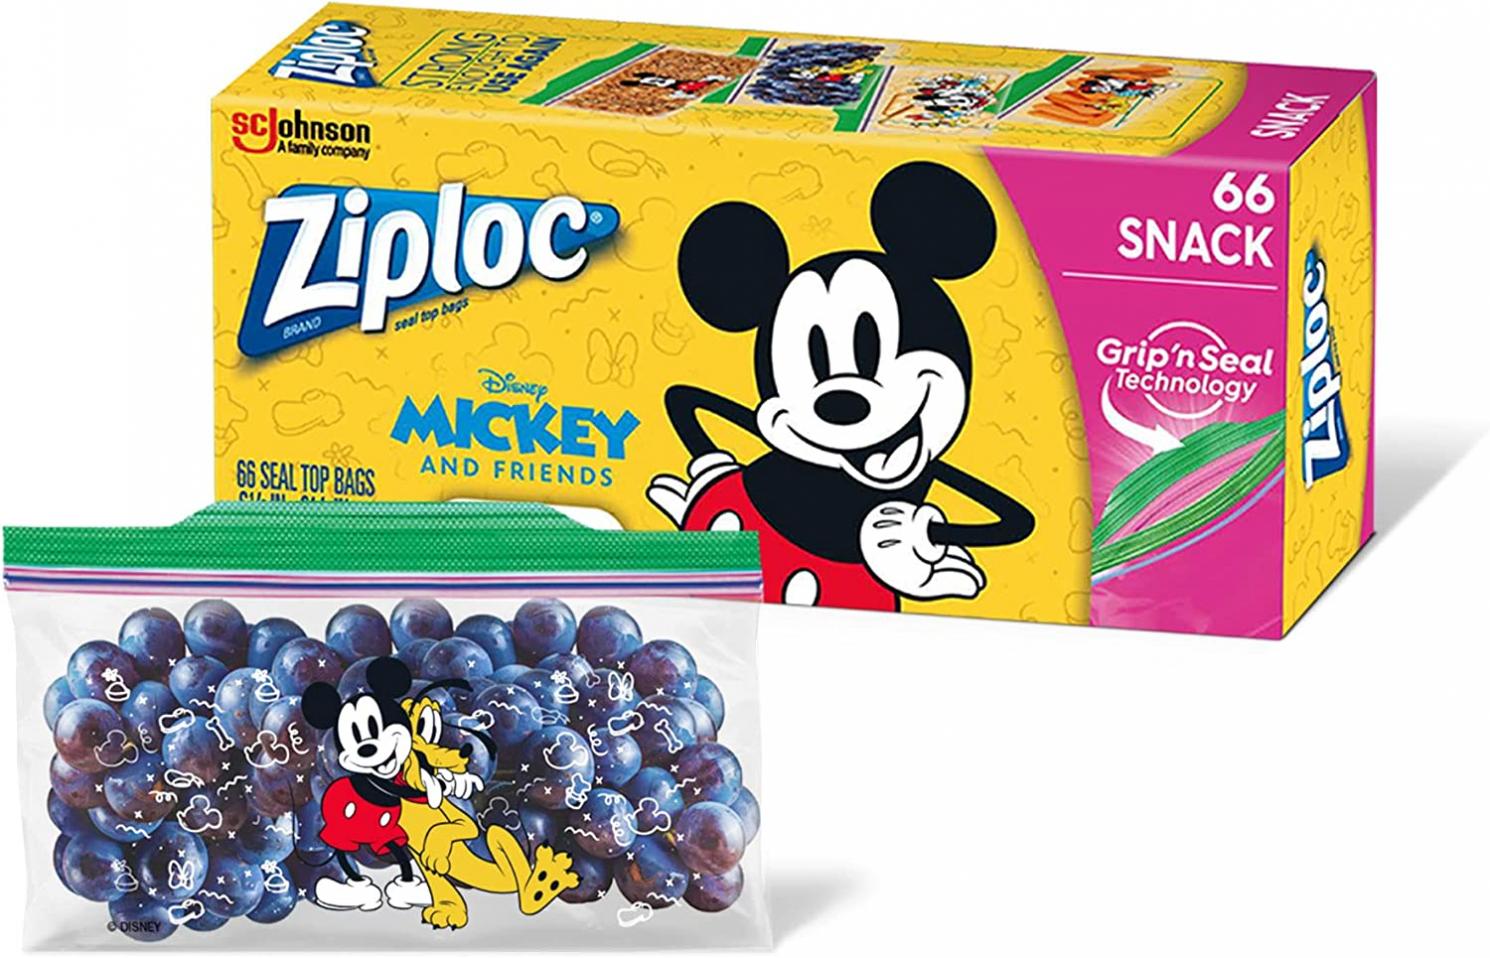 Ziploc Snack Bags for On the Go Freshness, Grip 'n Seal Technology for Easier Grip, Open, and Close, 66 Count, Mickey and Friends Designs